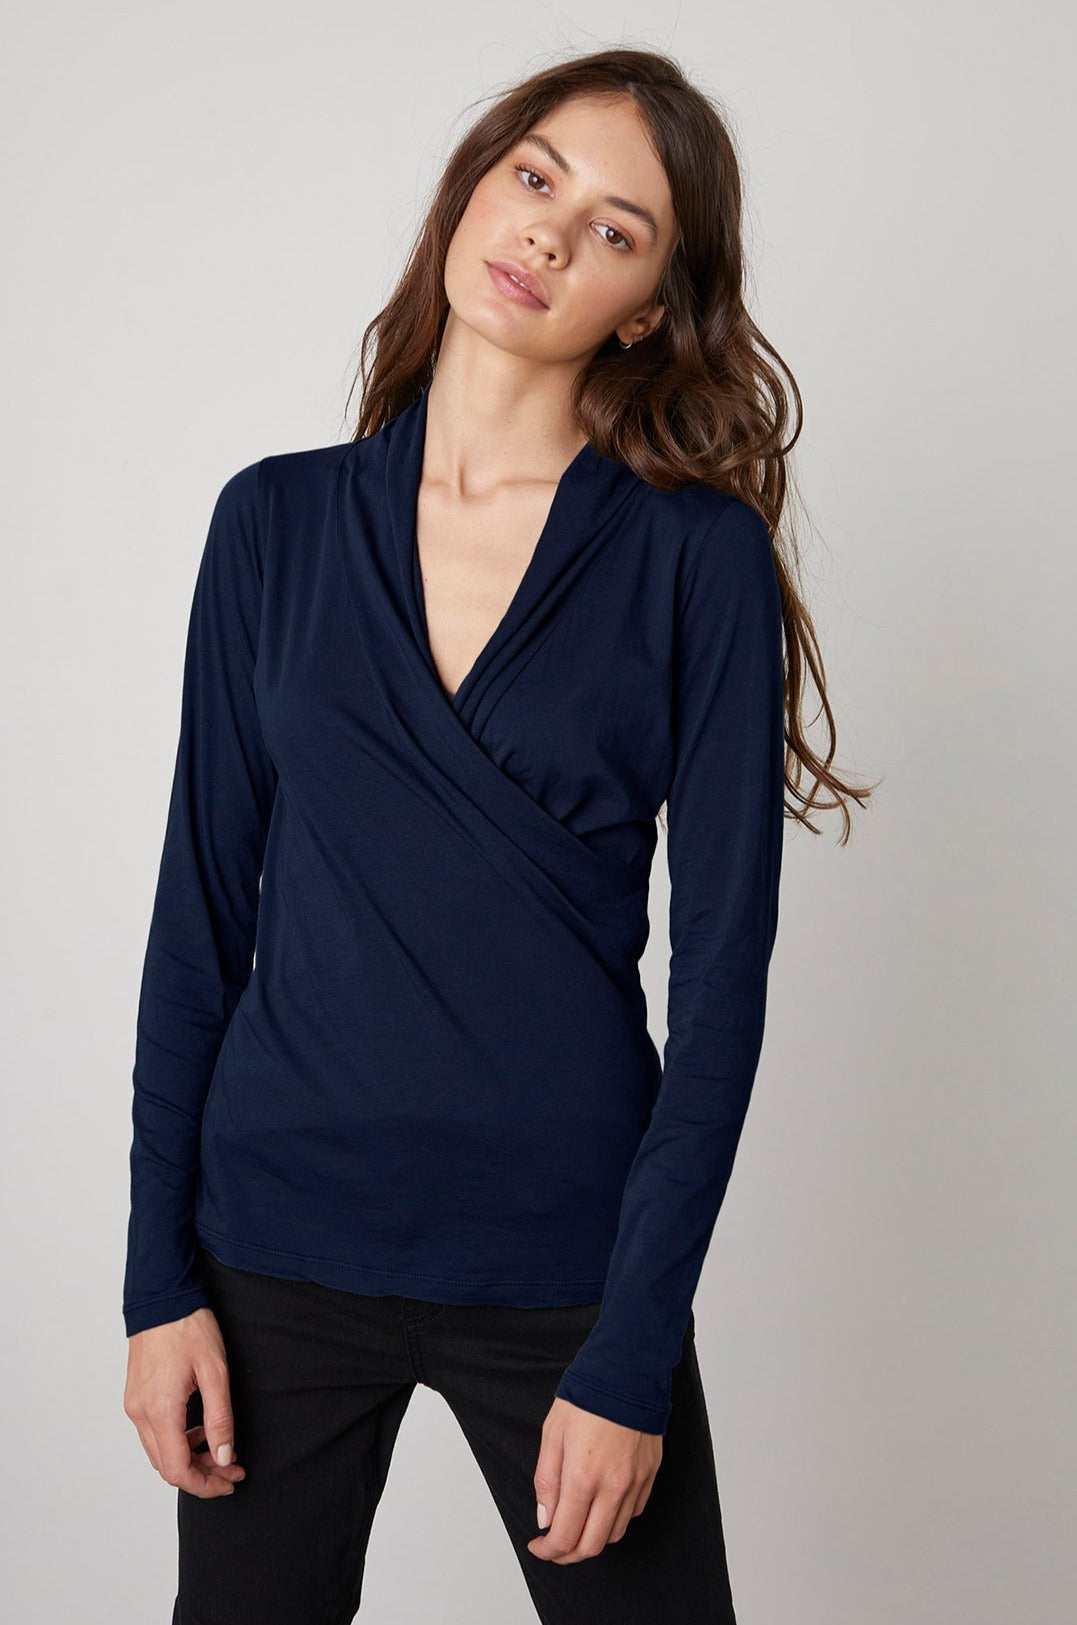   The model is wearing a Velvet by Graham & Spencer MERI WRAP FRONT FITTED TOP with a v - neck. 